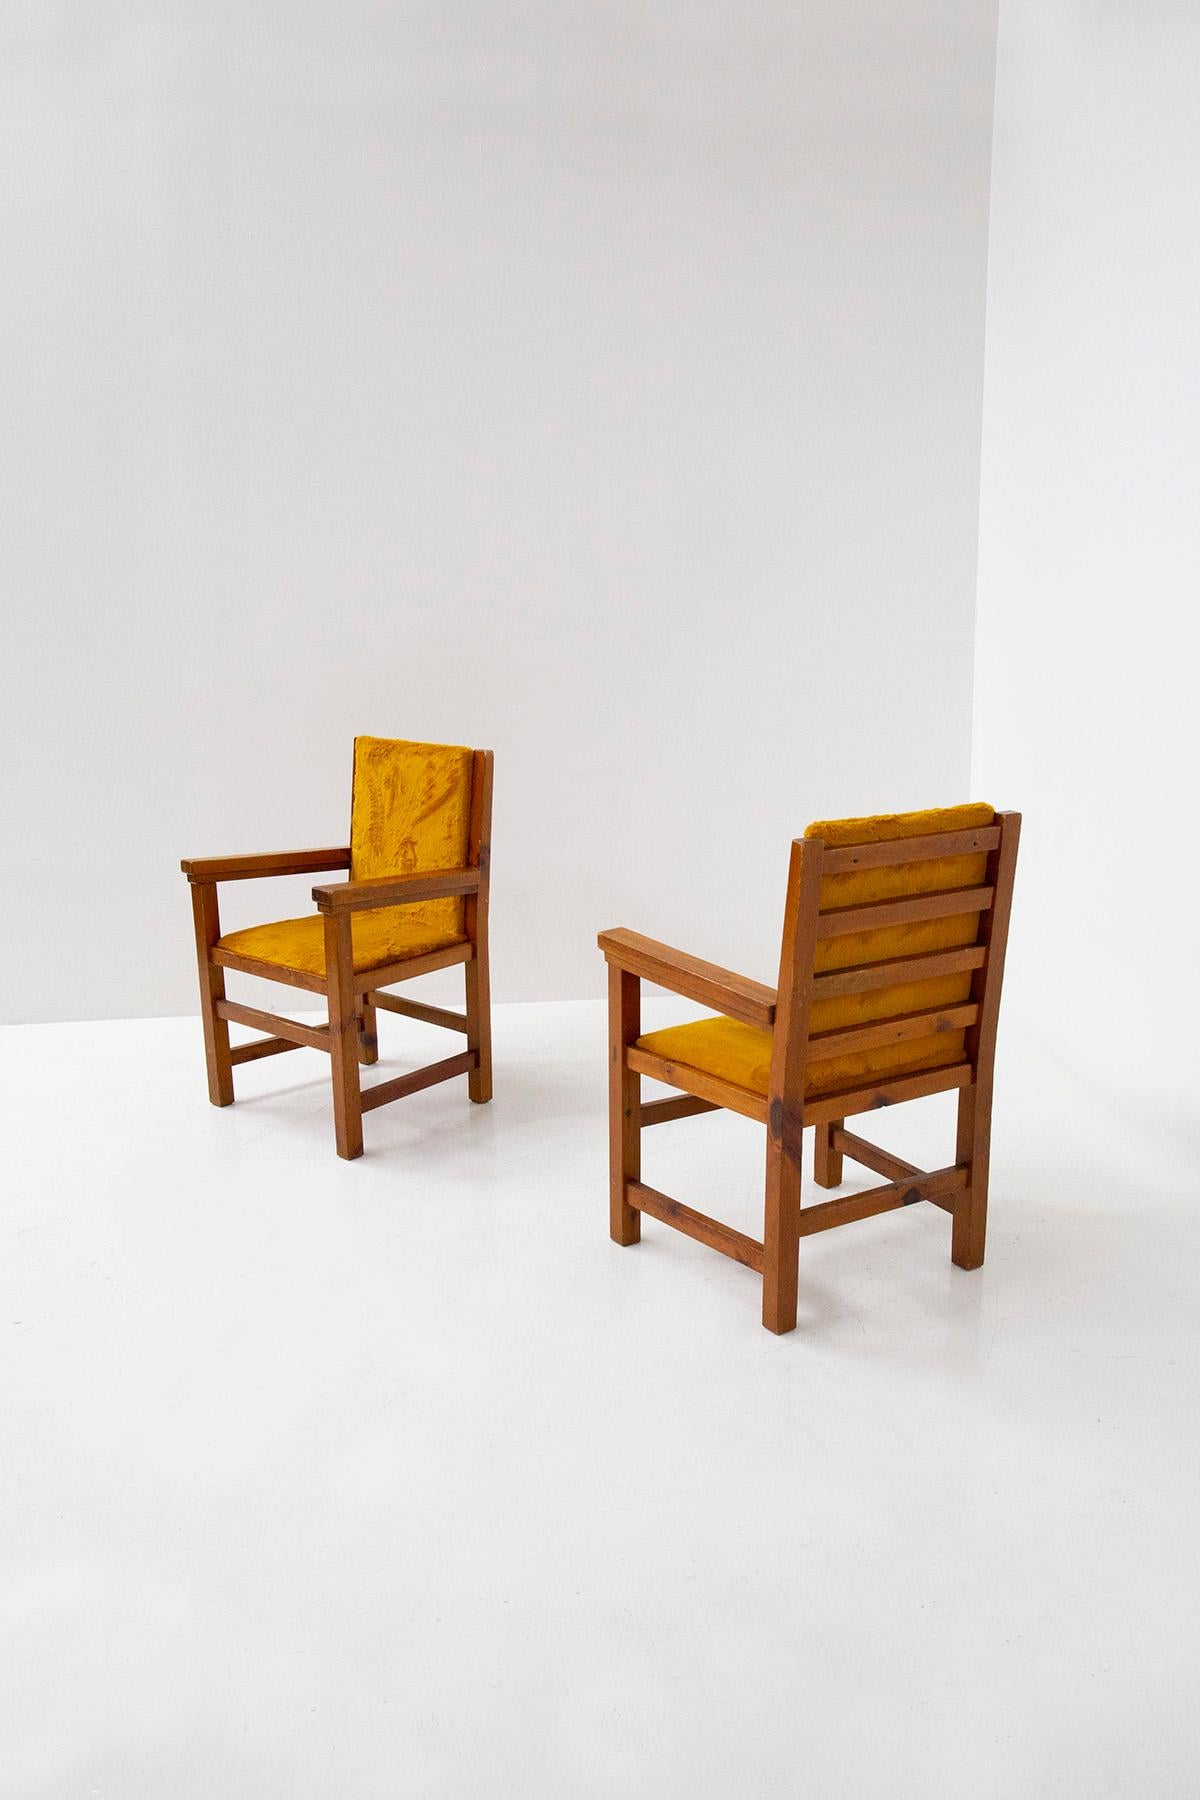 Beautiful pair of Italian armchairs from the 1960s. Collected from a large Italian mountain chalet. The pair of armchairs has a soft and elegant dark yellow fur . The frame is made of very solid walnut wood, with shapes typical of mountain